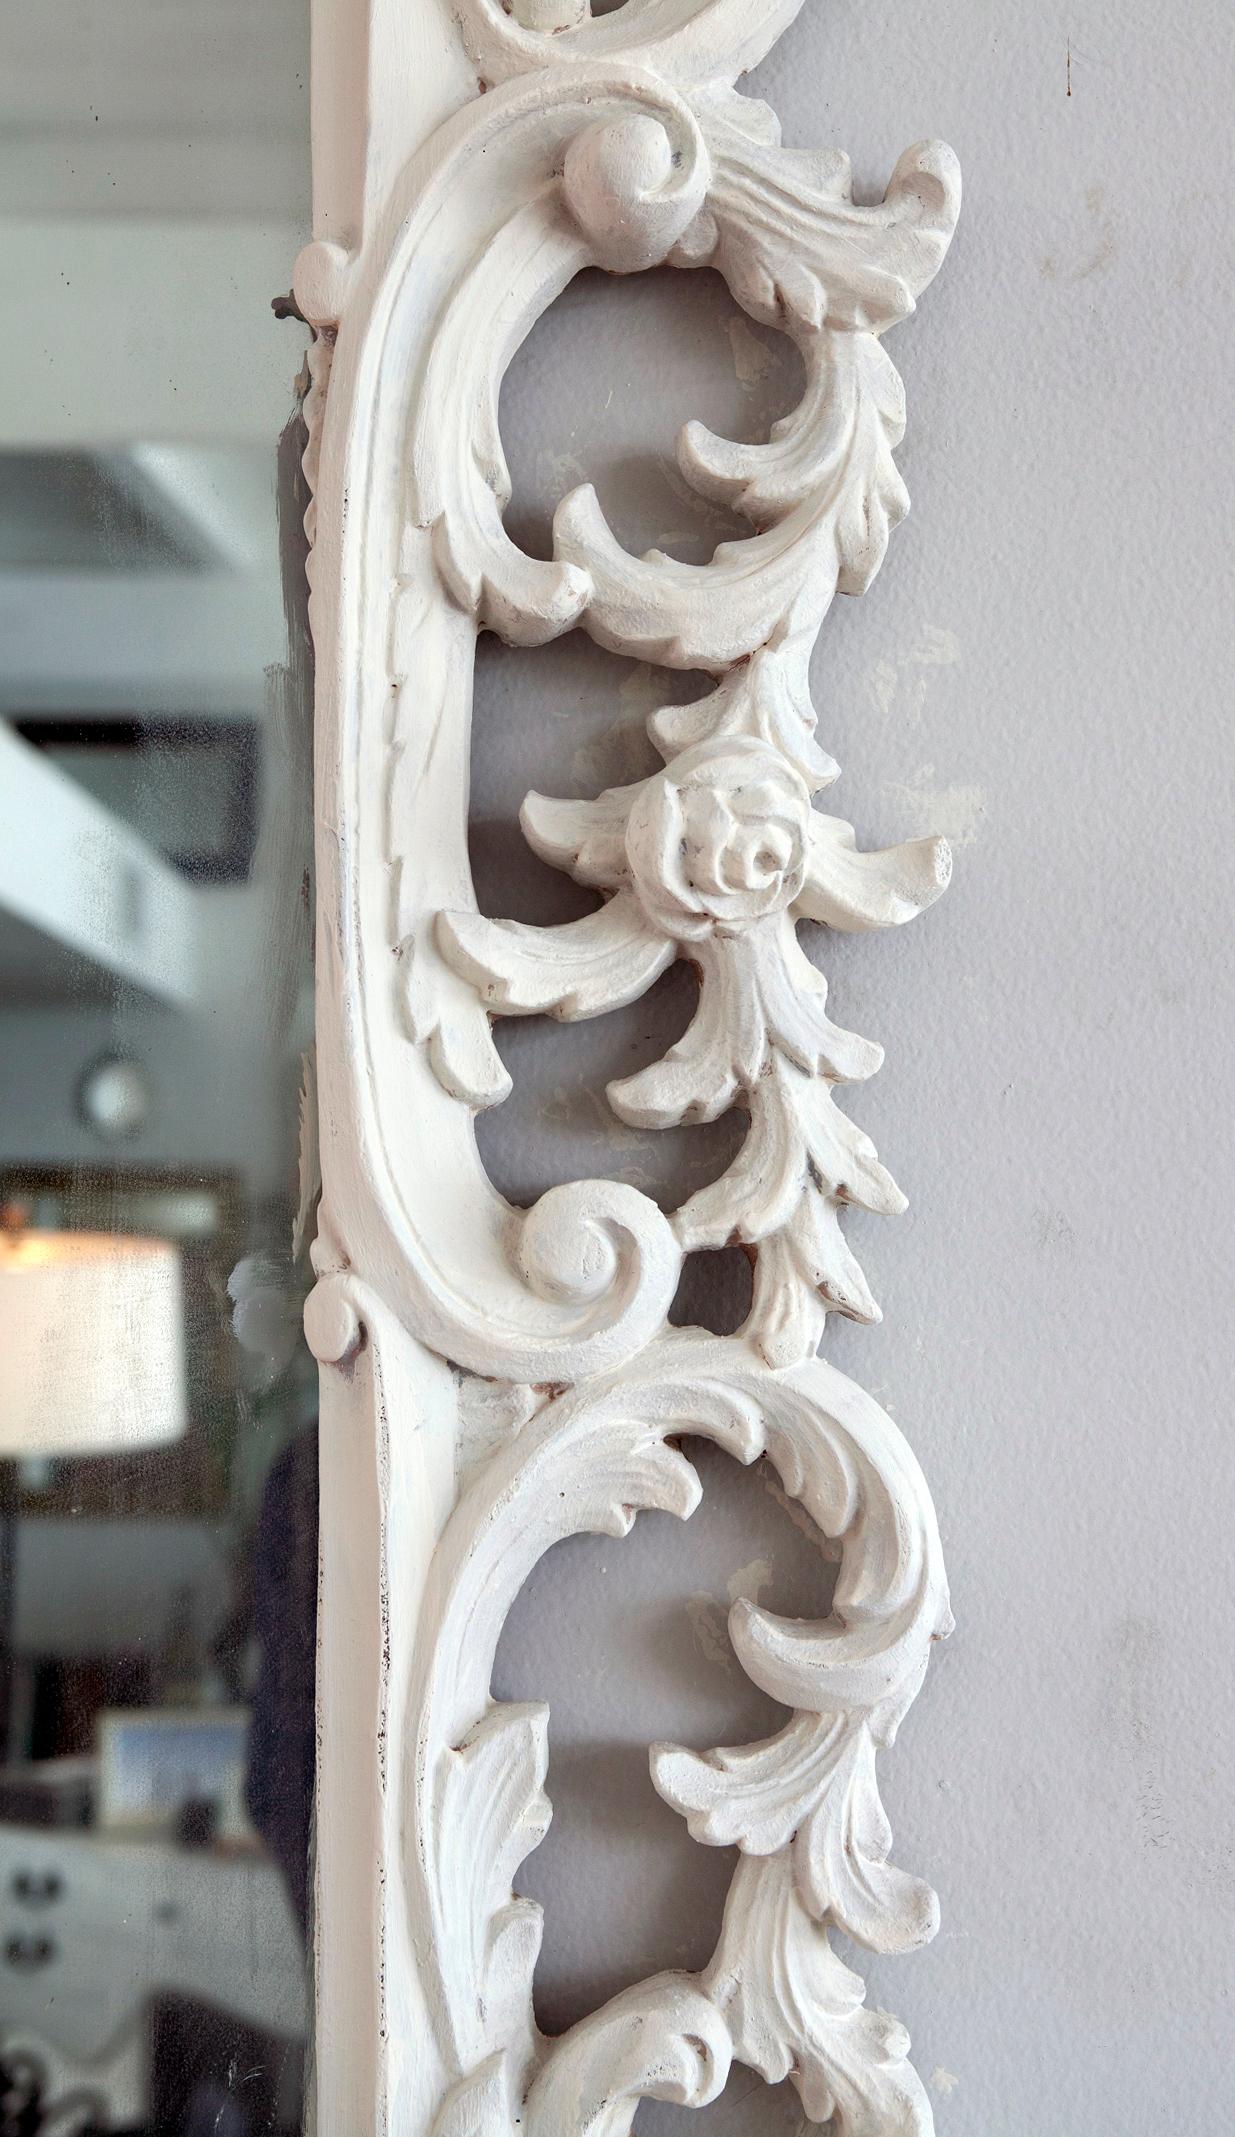 A dramatic statement piece.
Ornate mirror constructed of hardwood & resin.
Ready to hang. Very sturdy construction, Masonite backing.
Hanging instructions enclosed.
The finish is matte but can be sprayed in lacquer for an additional charge.